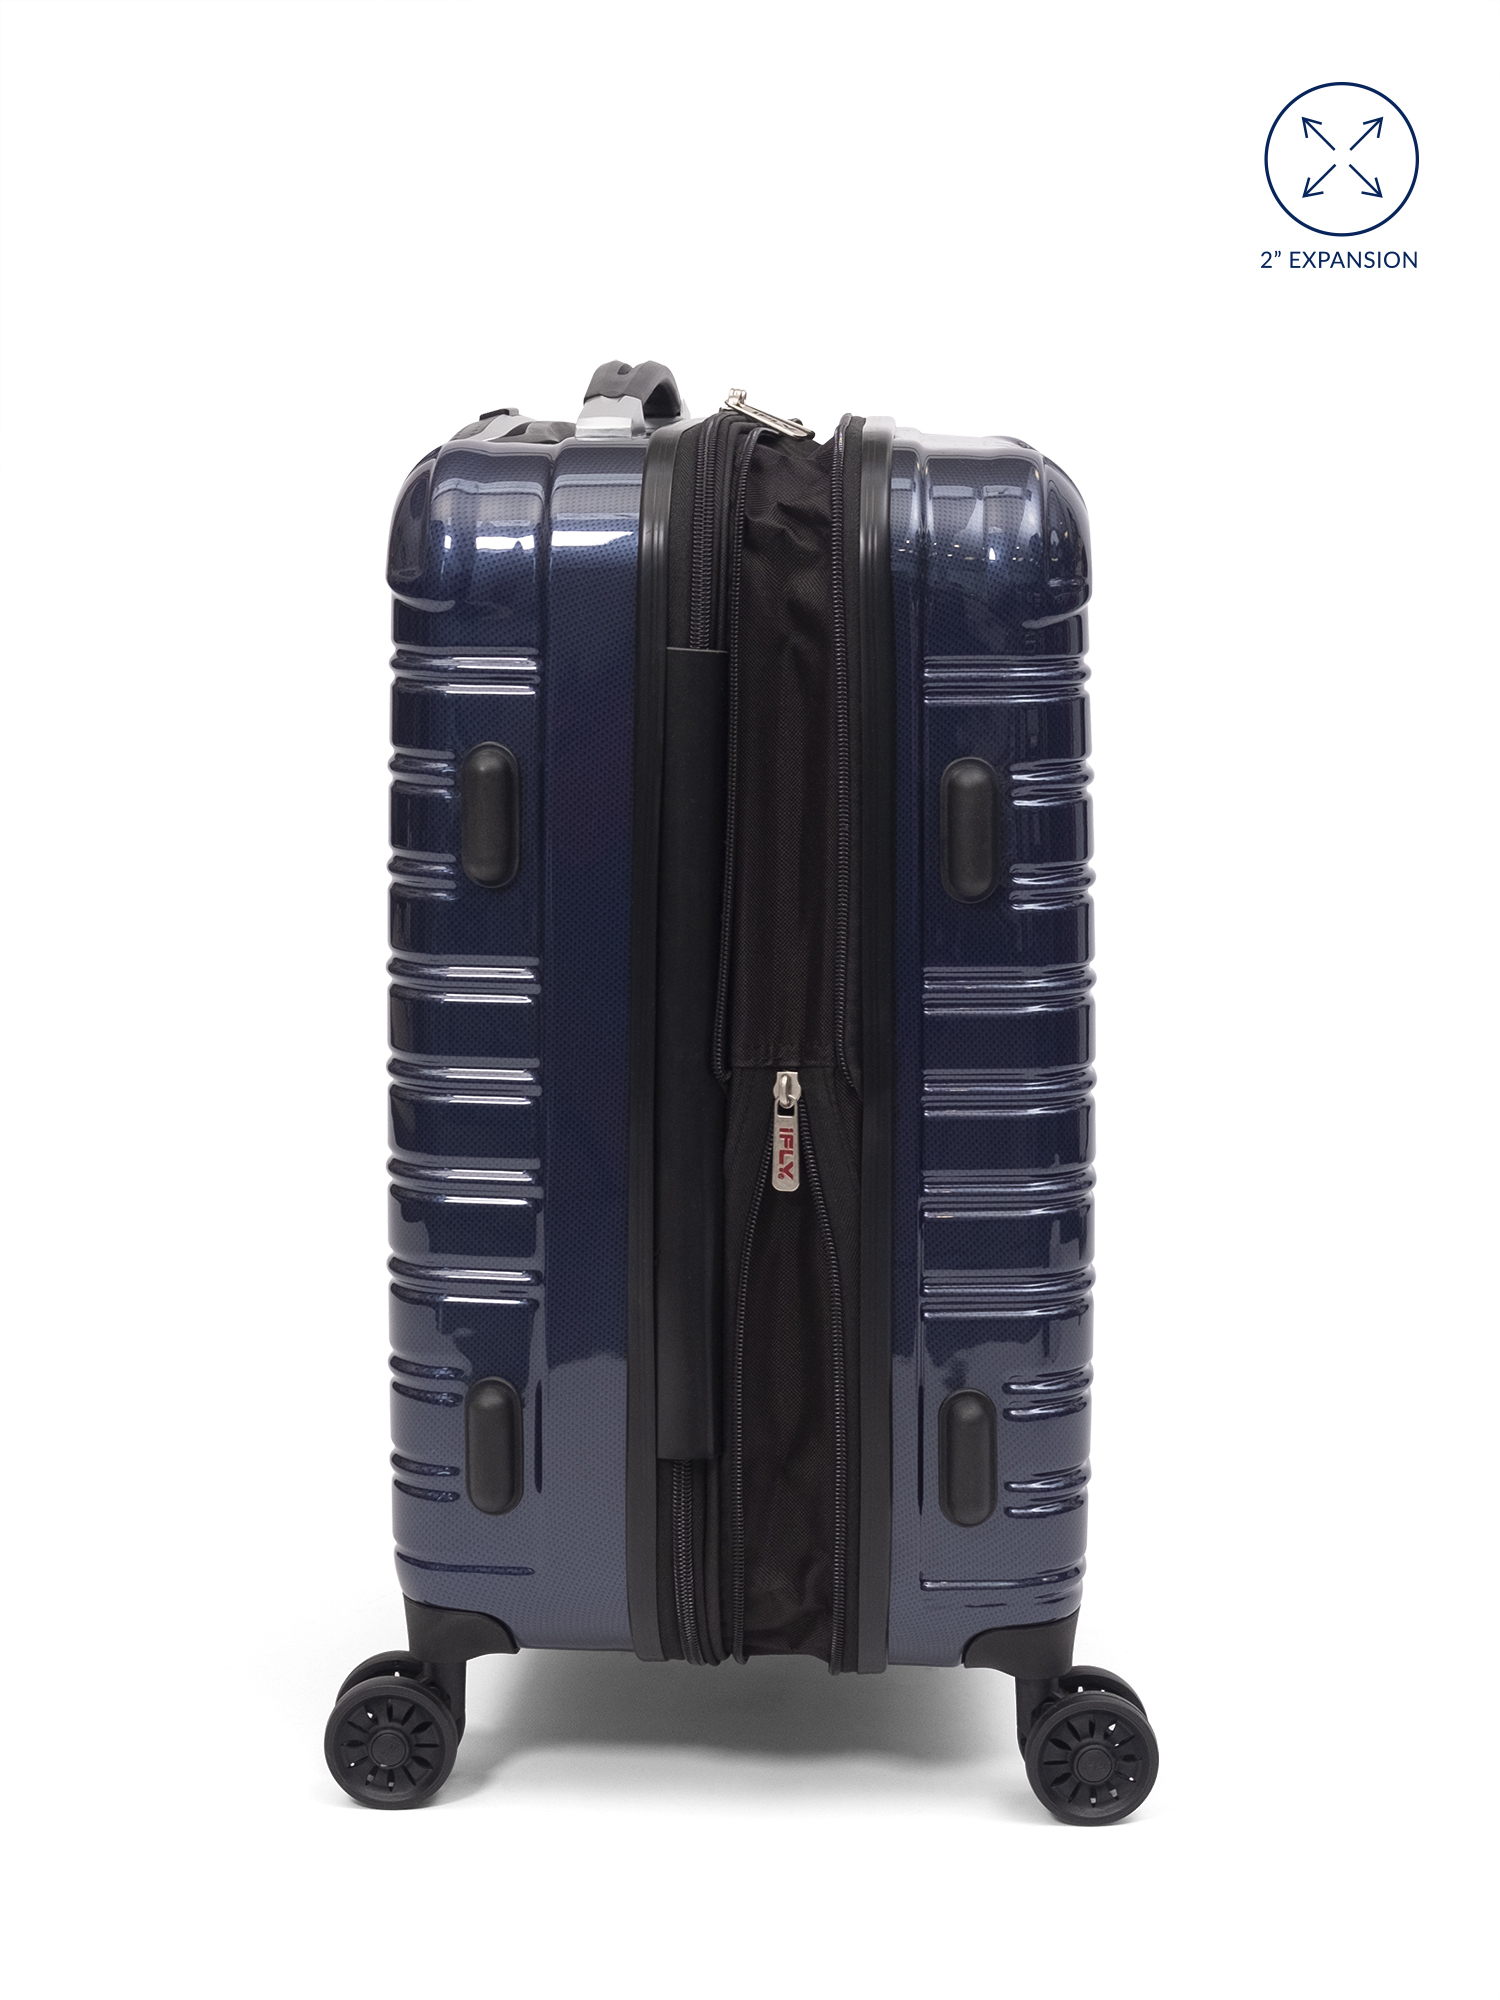 iFLY Online Exclusive Hard Sided Luggage Fibertech 20" & Travel Case - image 5 of 9